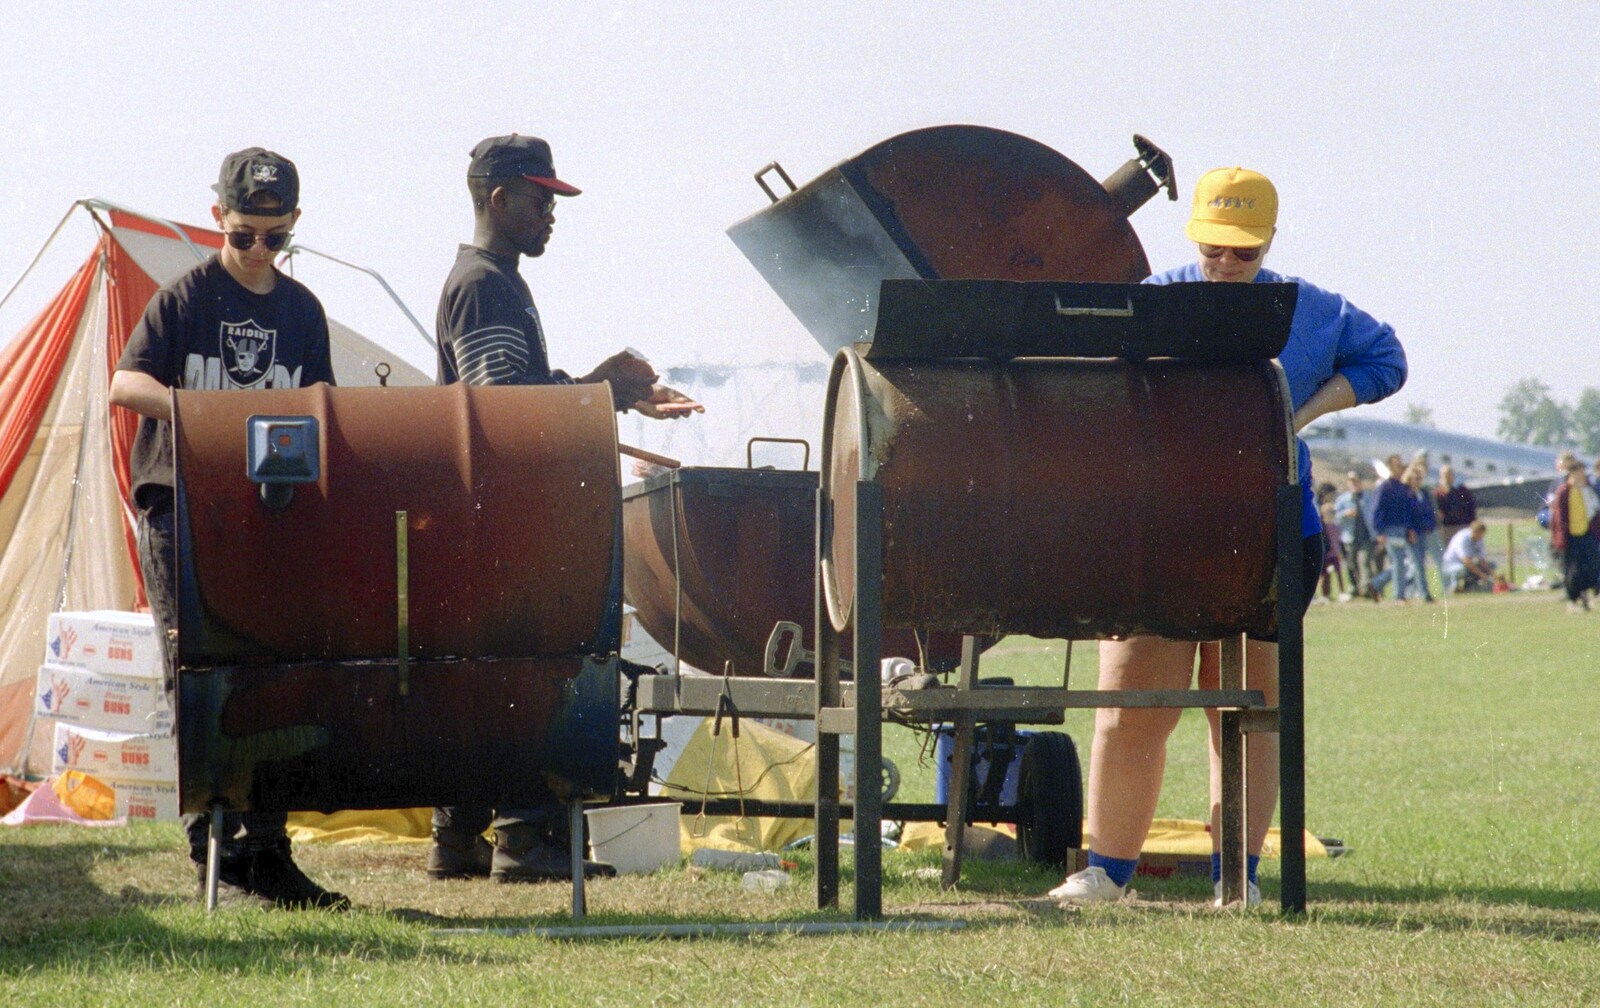 The boys from the base cook up some burgers from The Mildenhall Air Fete, Mildenhall, Suffolk - 29th May 1994